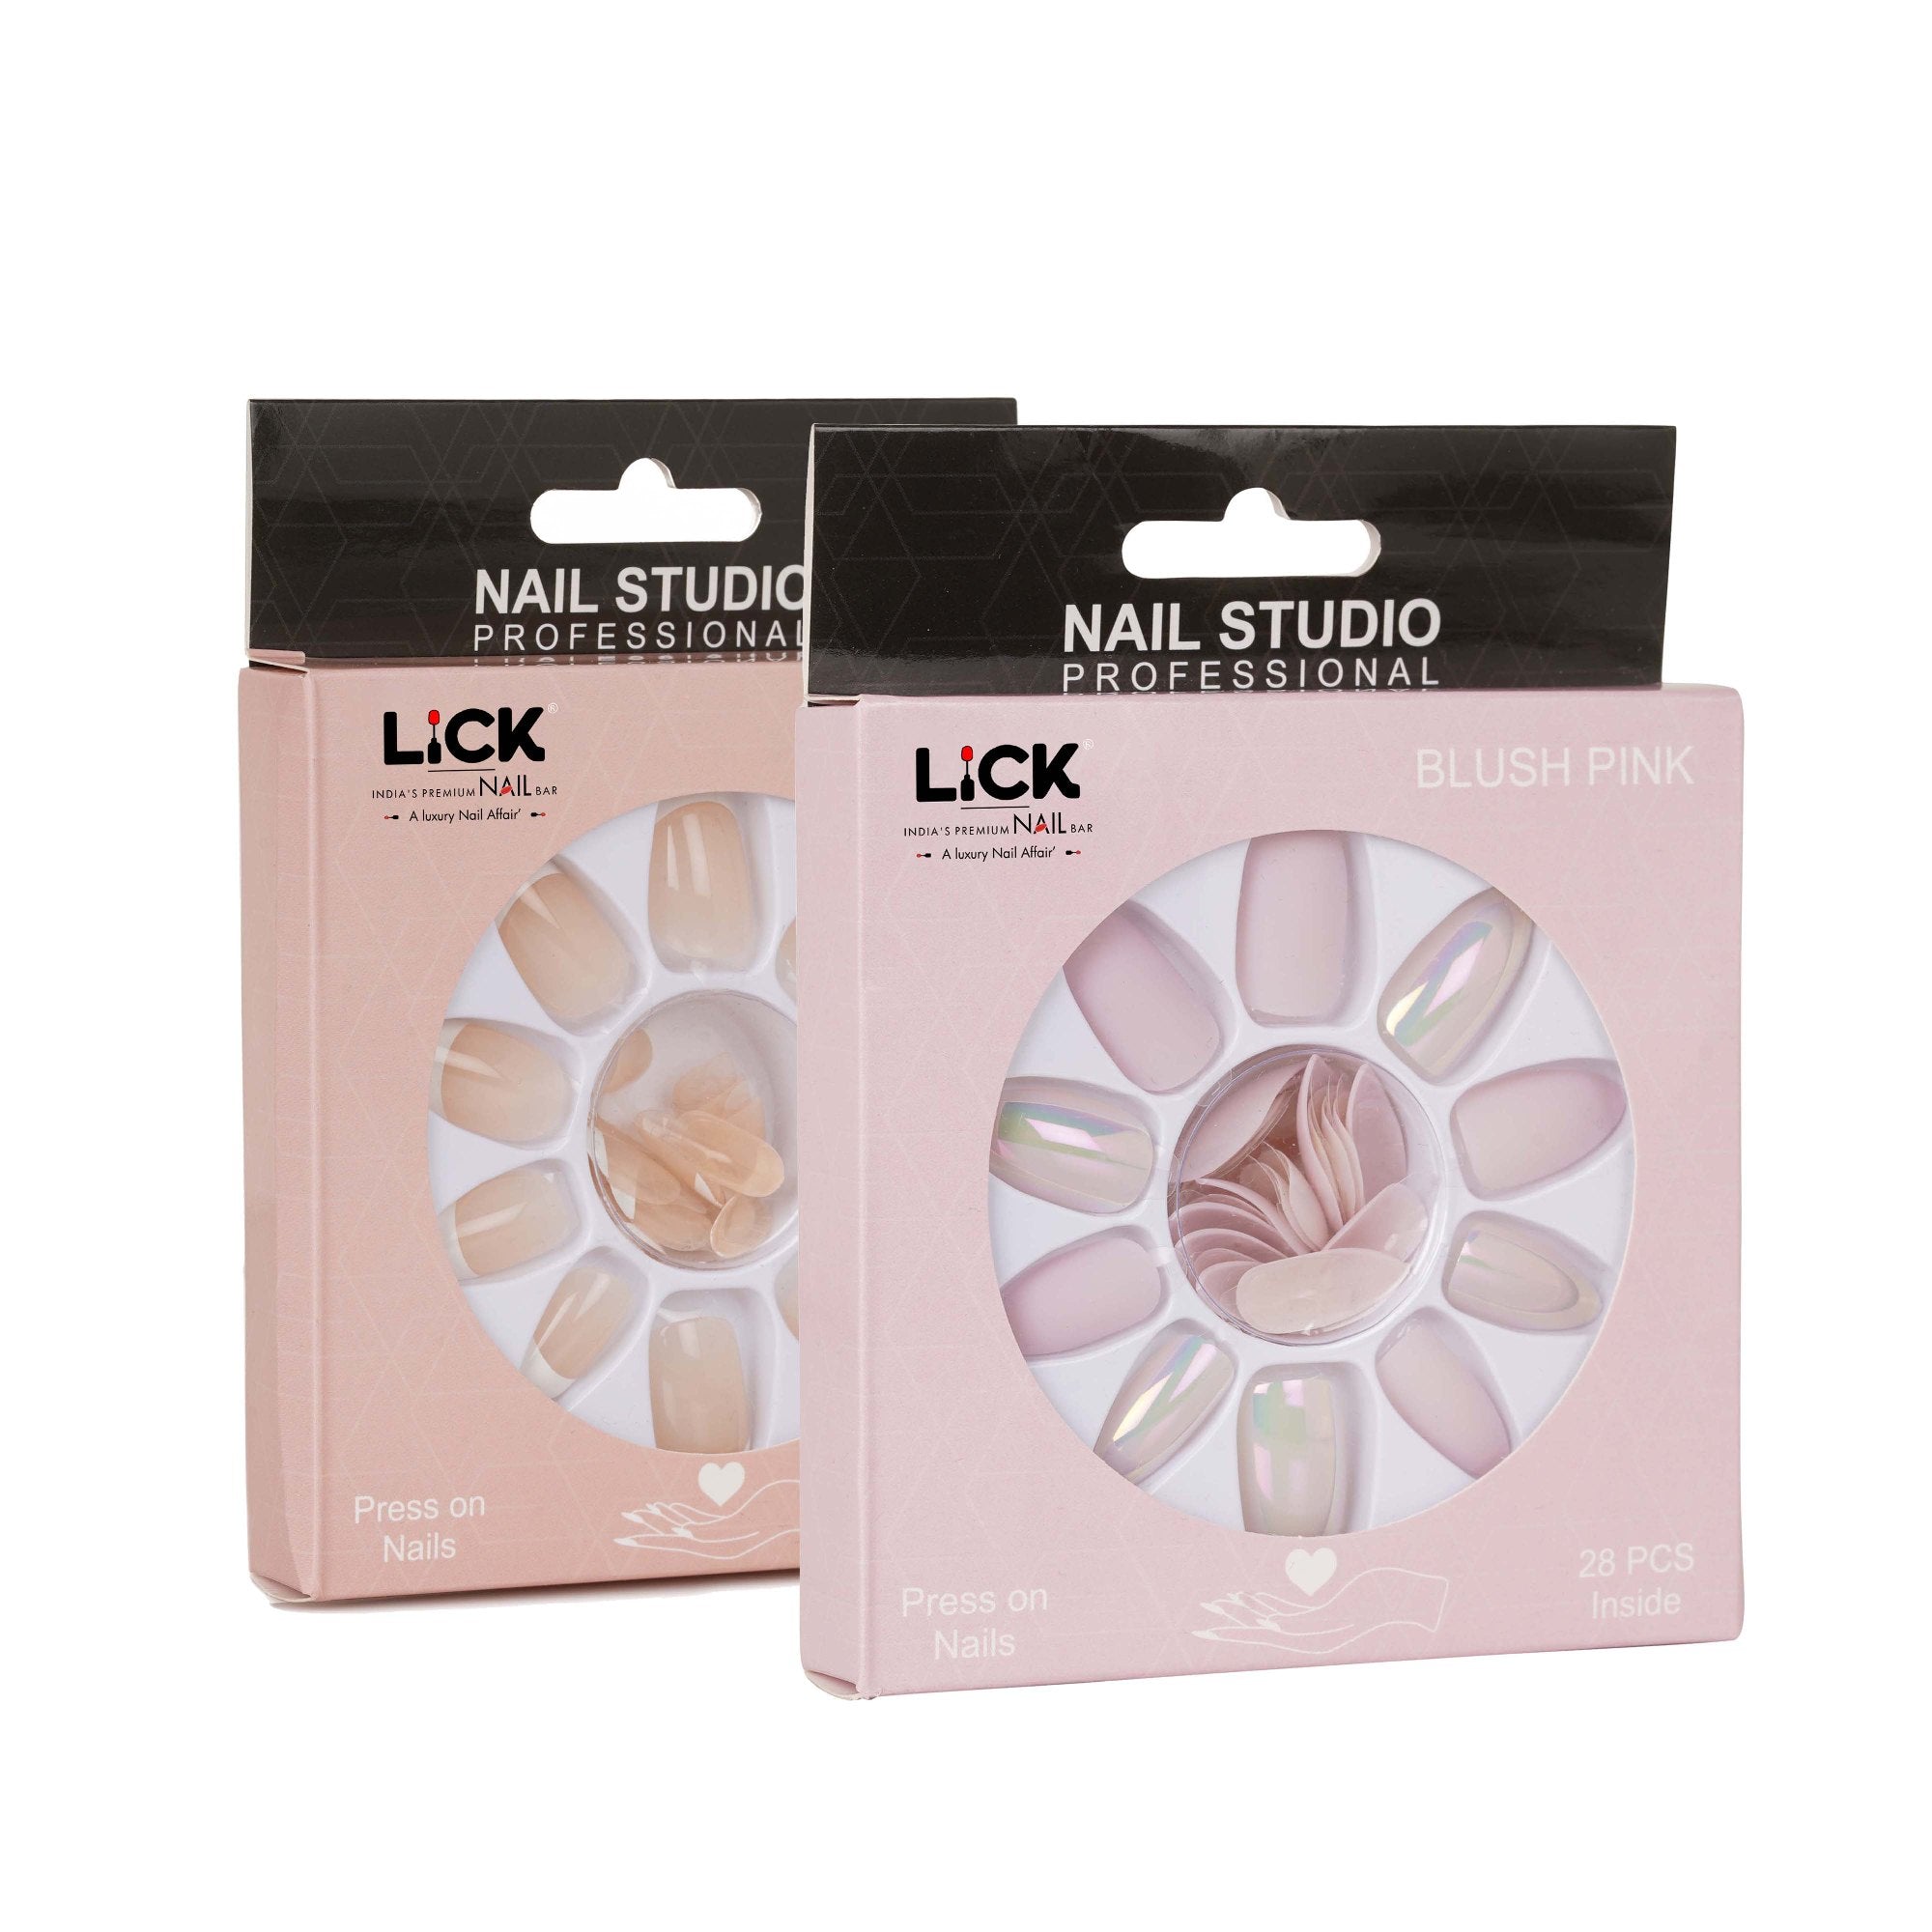 Lick Nails Blush Pink & Ivory Press on Nails With Quick Dry Nail Glue, Combo of 2 (28, 24 Pcs Per Pack)